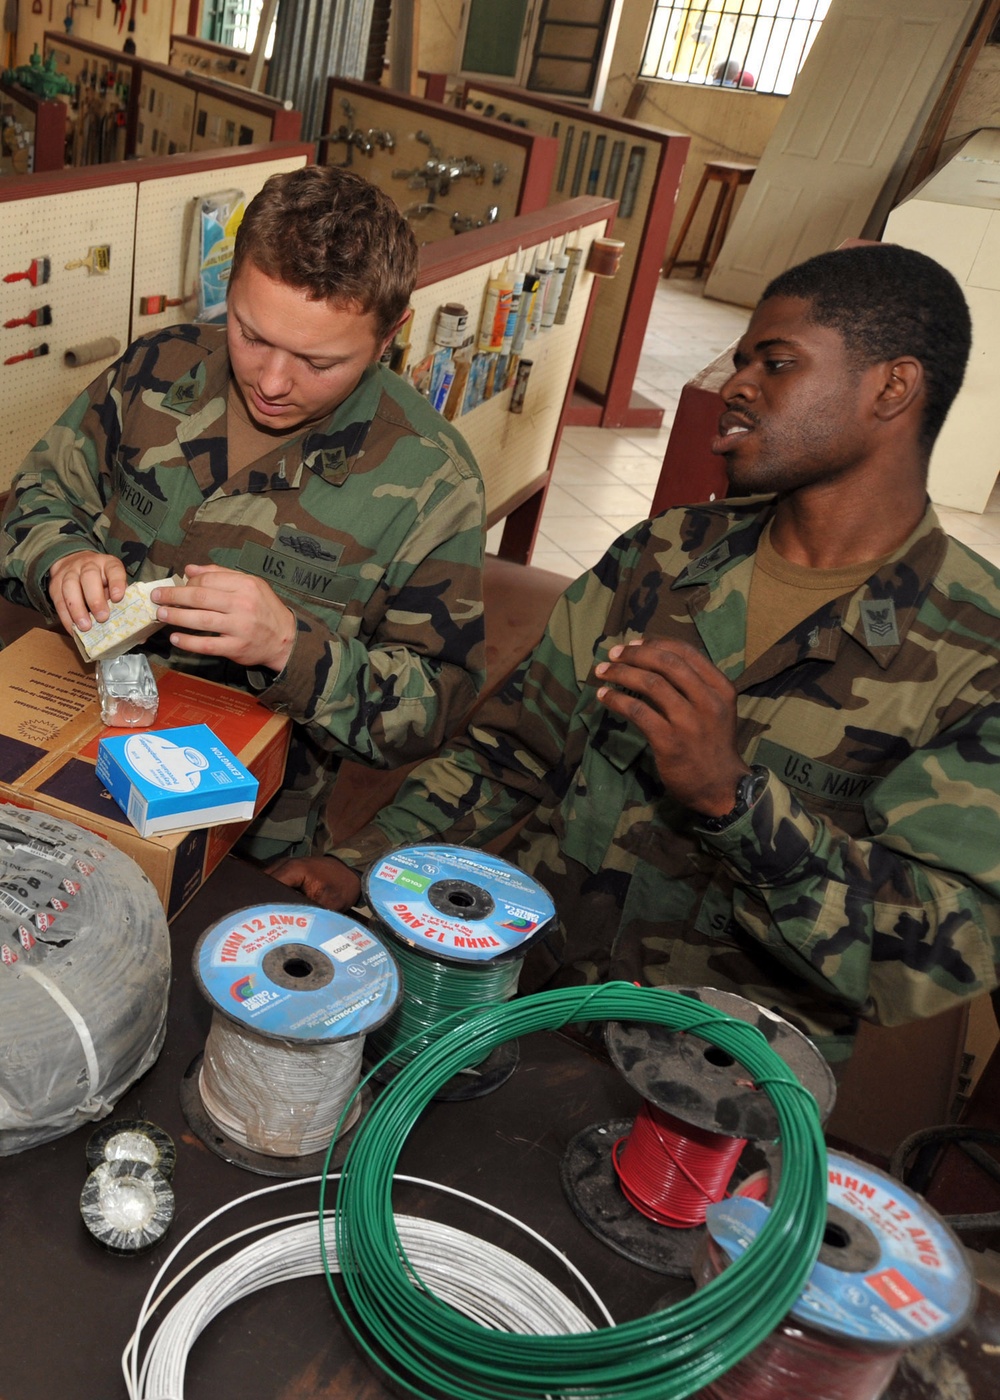 Seabees provide electricity to Cap-Haitien orphanage